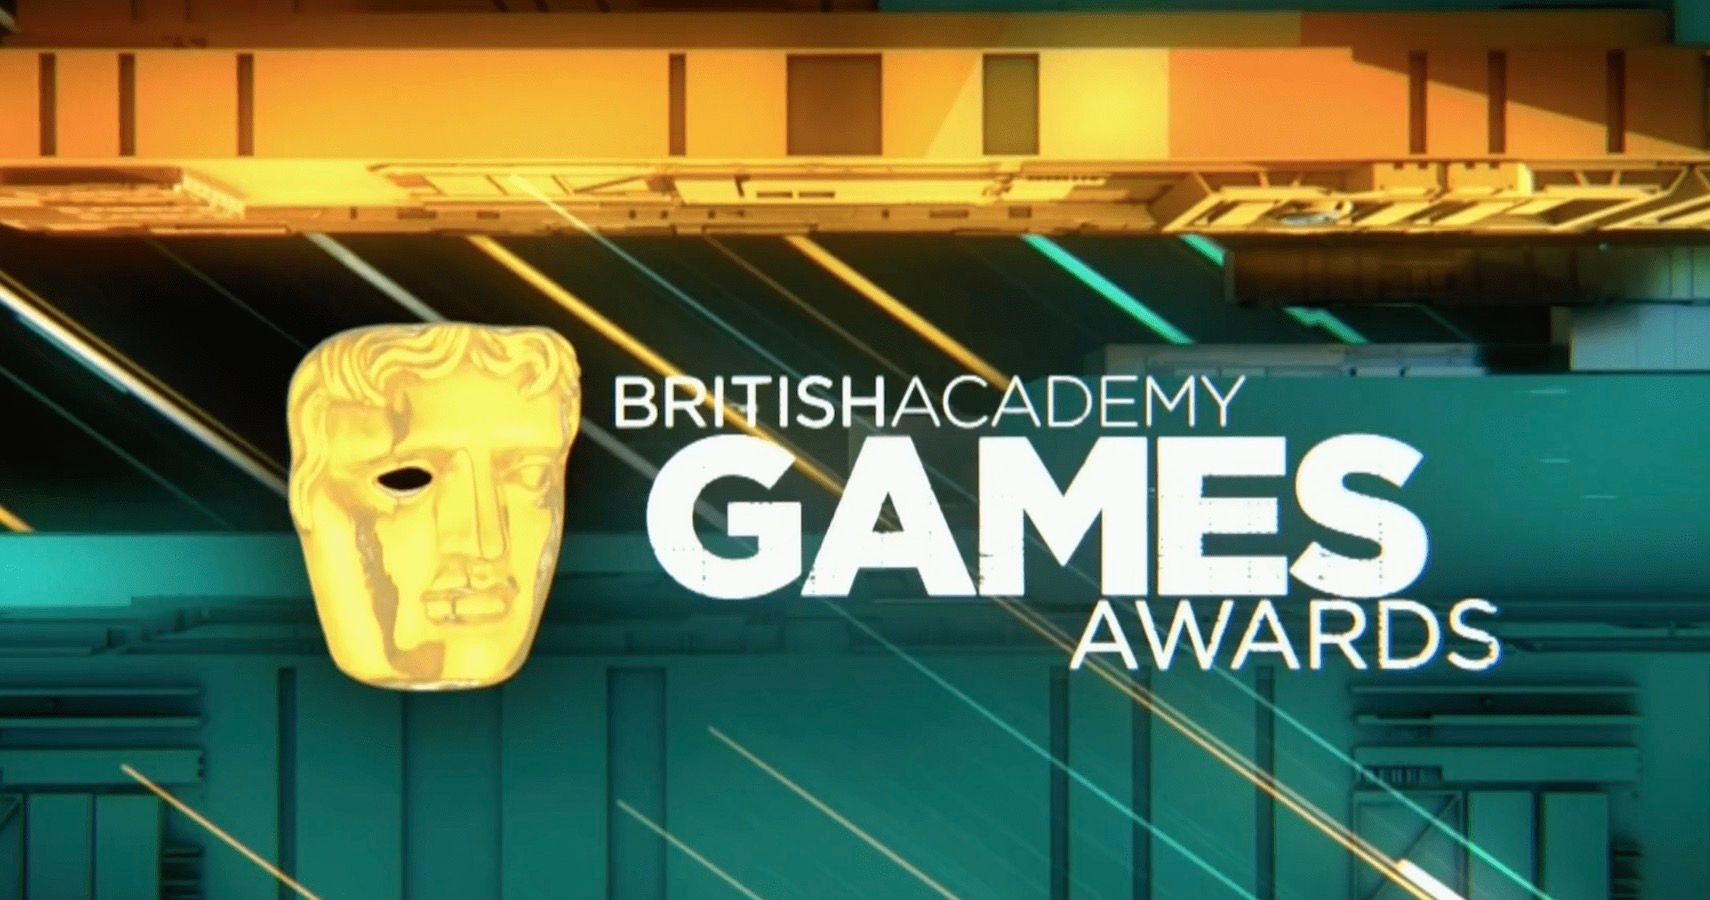 British Academy Games Awards Will Include New Award Voted For By Fans